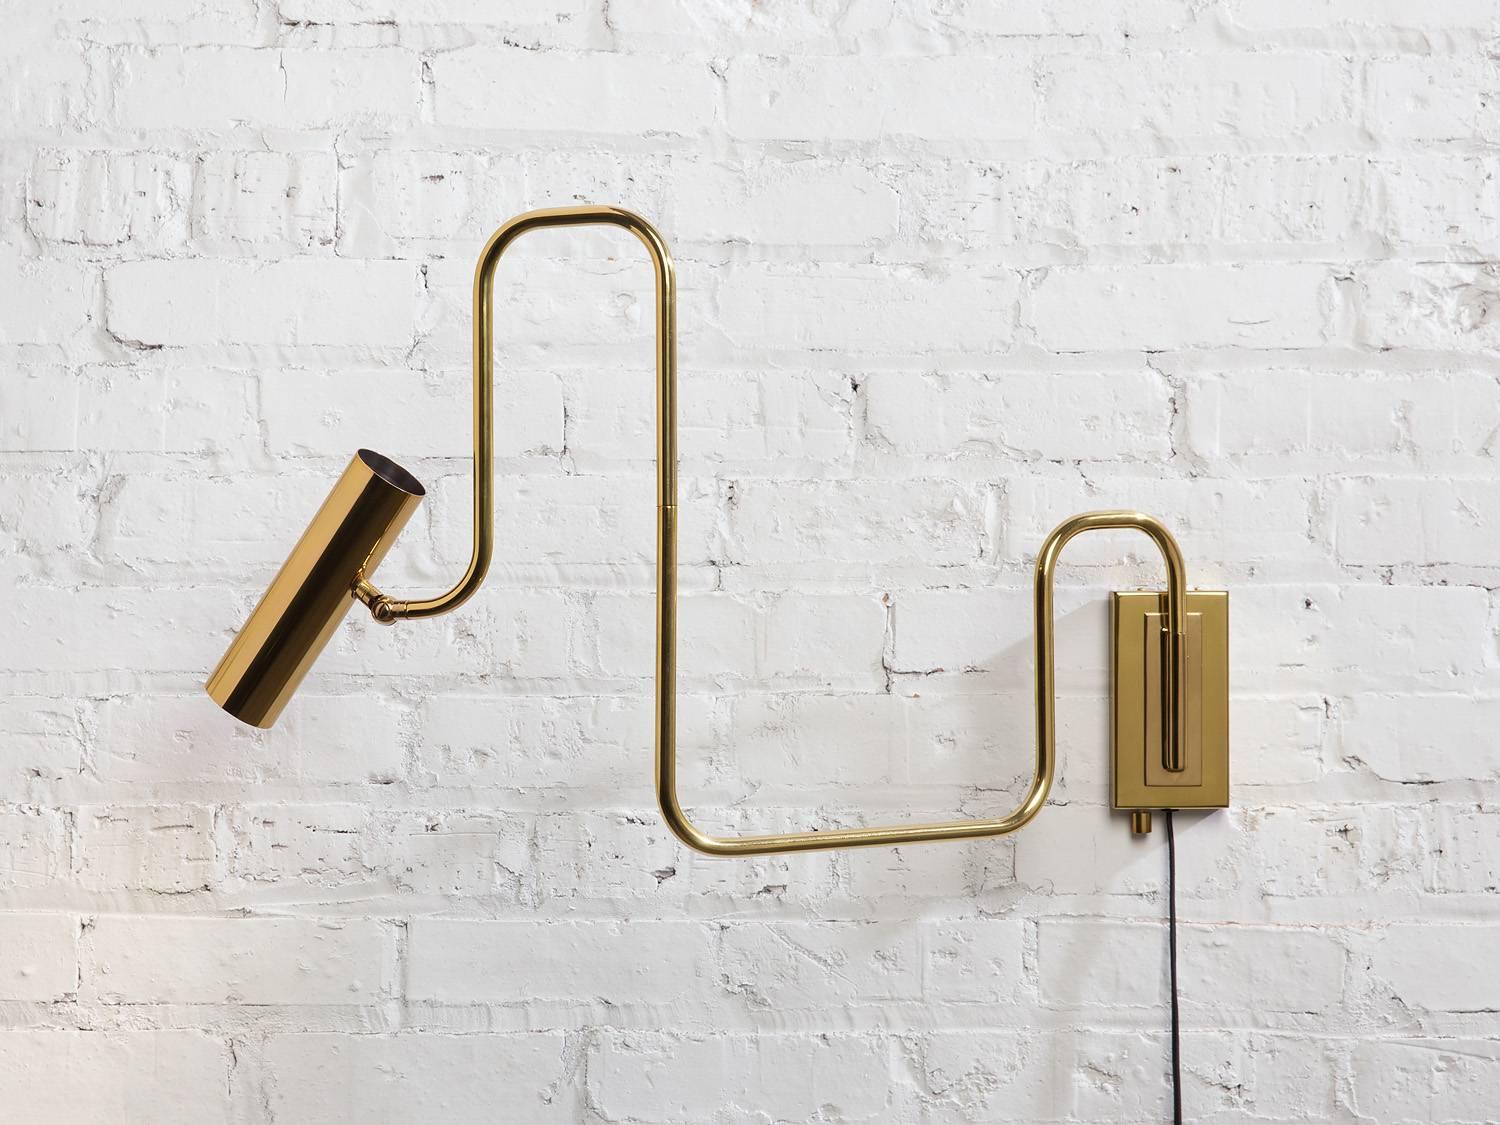 American Pivot Single Wall Sconce with Articulating Arms in Polished Tarnished Brass For Sale